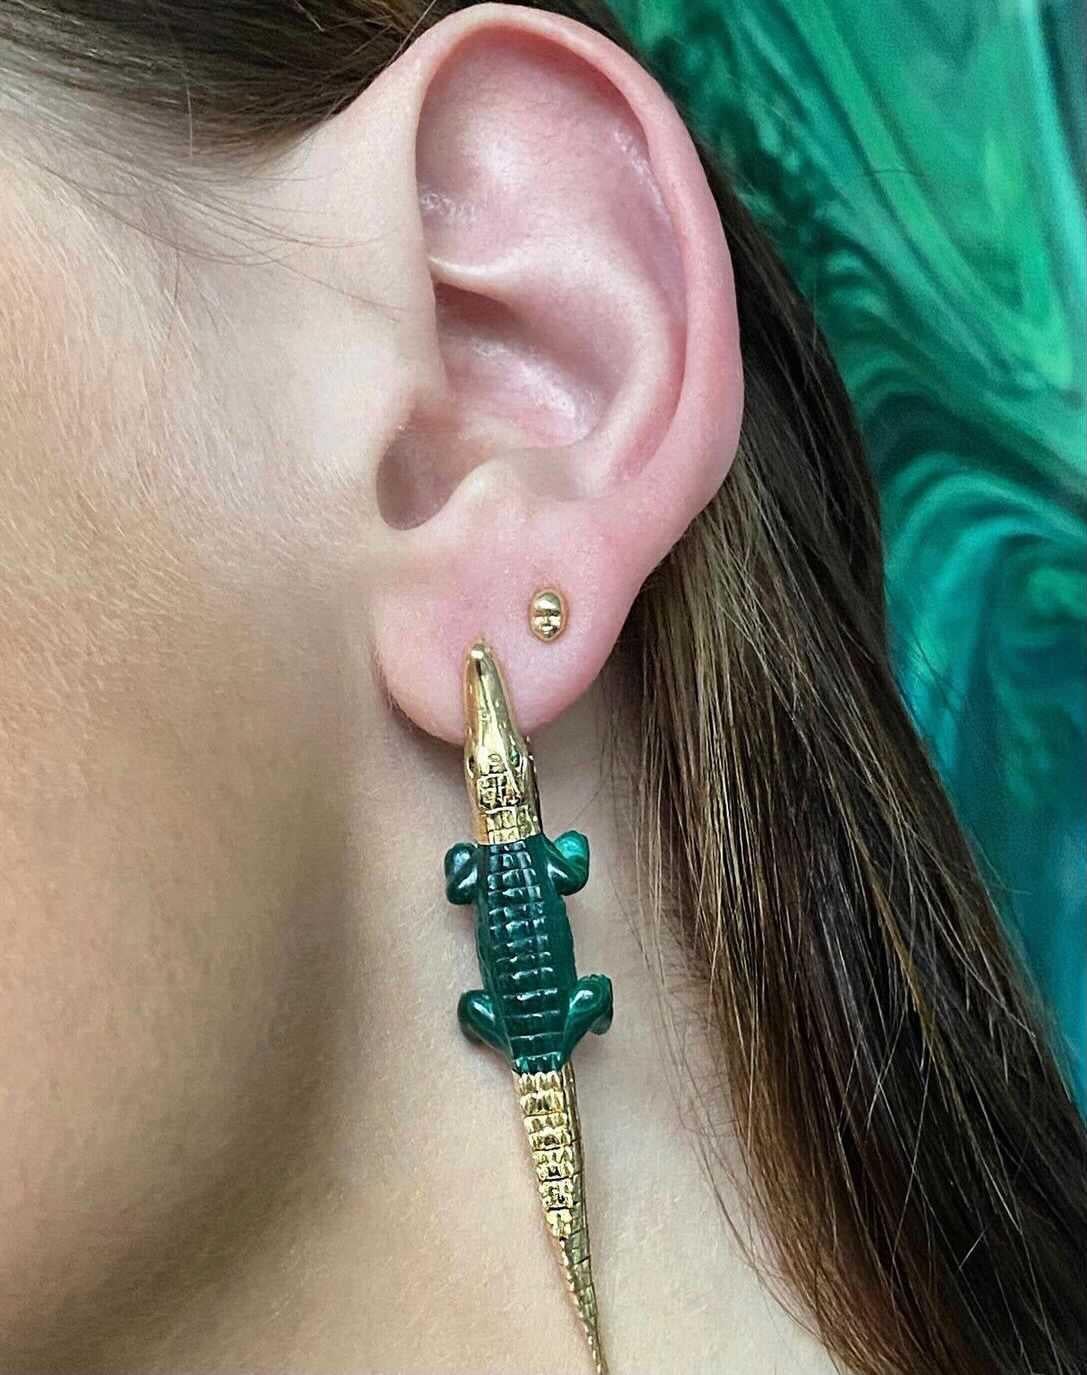 Intricately carved and hand-crafted to replicate an alligator’s body in miniature. These earrings are designed in 18k yellow gold with the alligator’s mouth acting as the earrings’ closing bite mechanism to snap onto the ear. The body of the